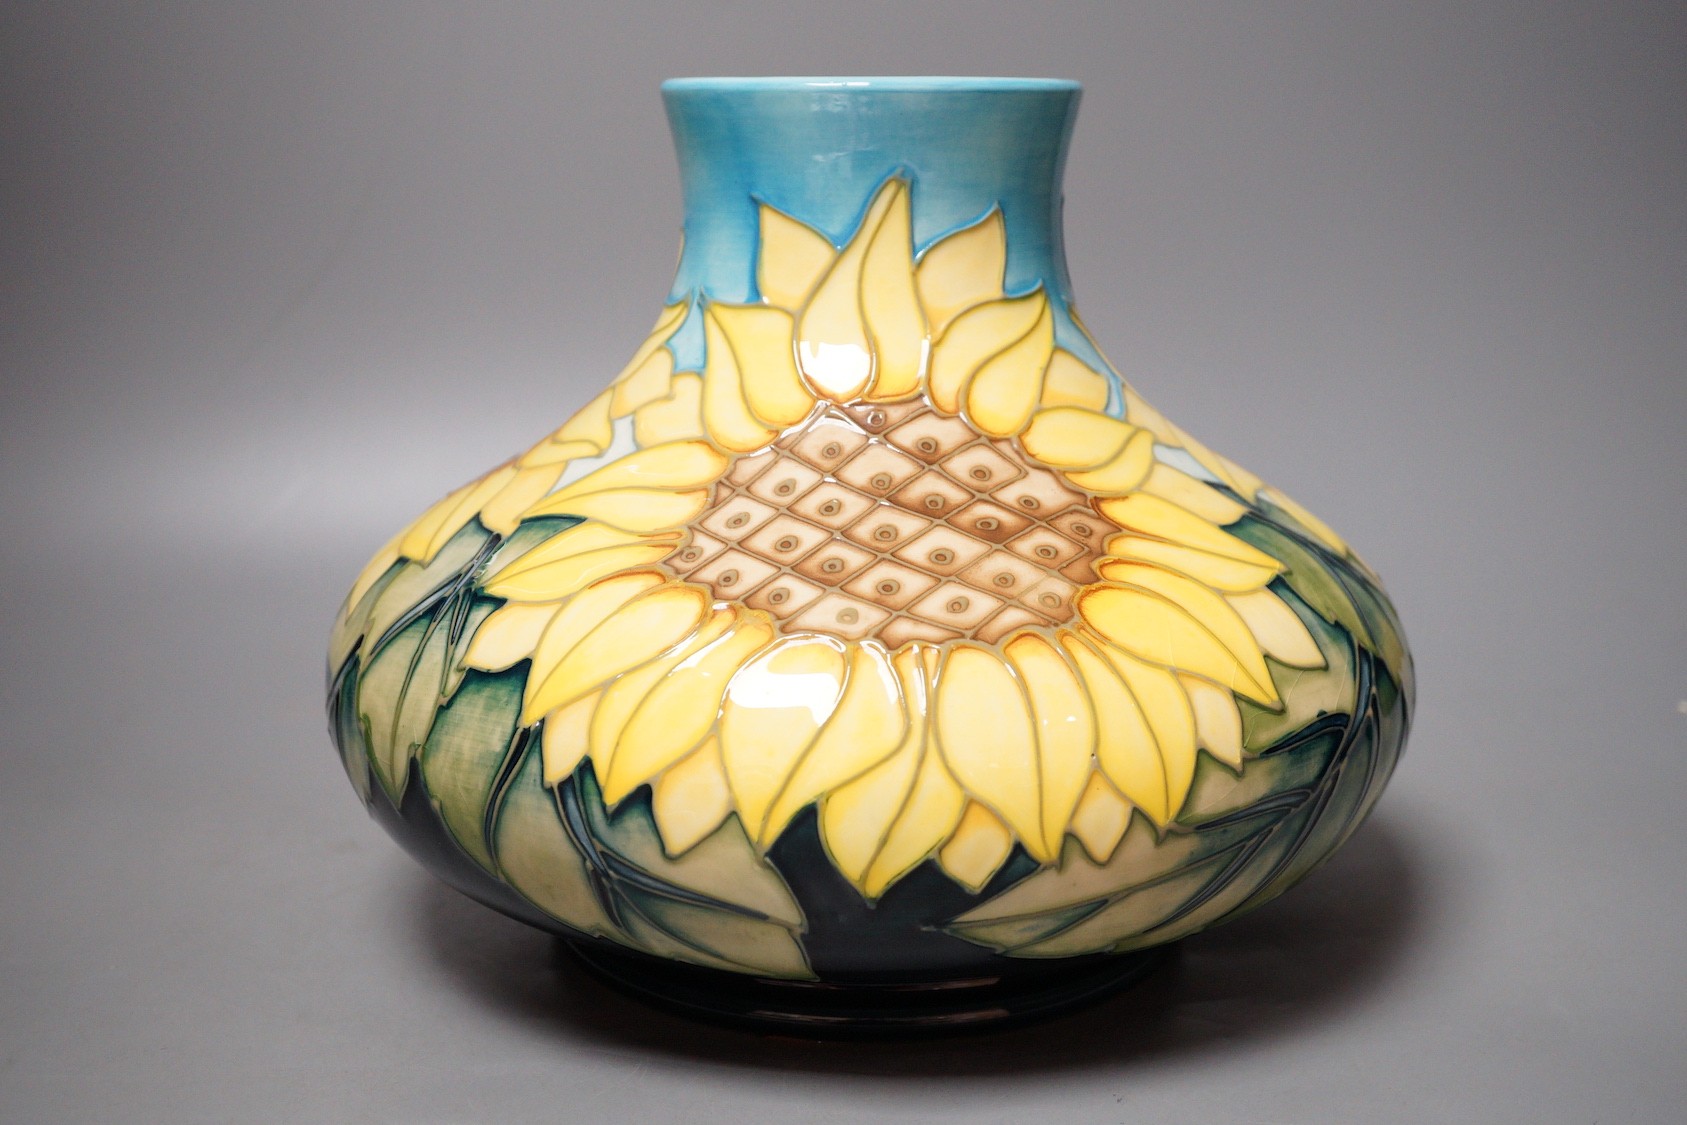 A Moorcroft pottery vase of compressed form, decorated in the 